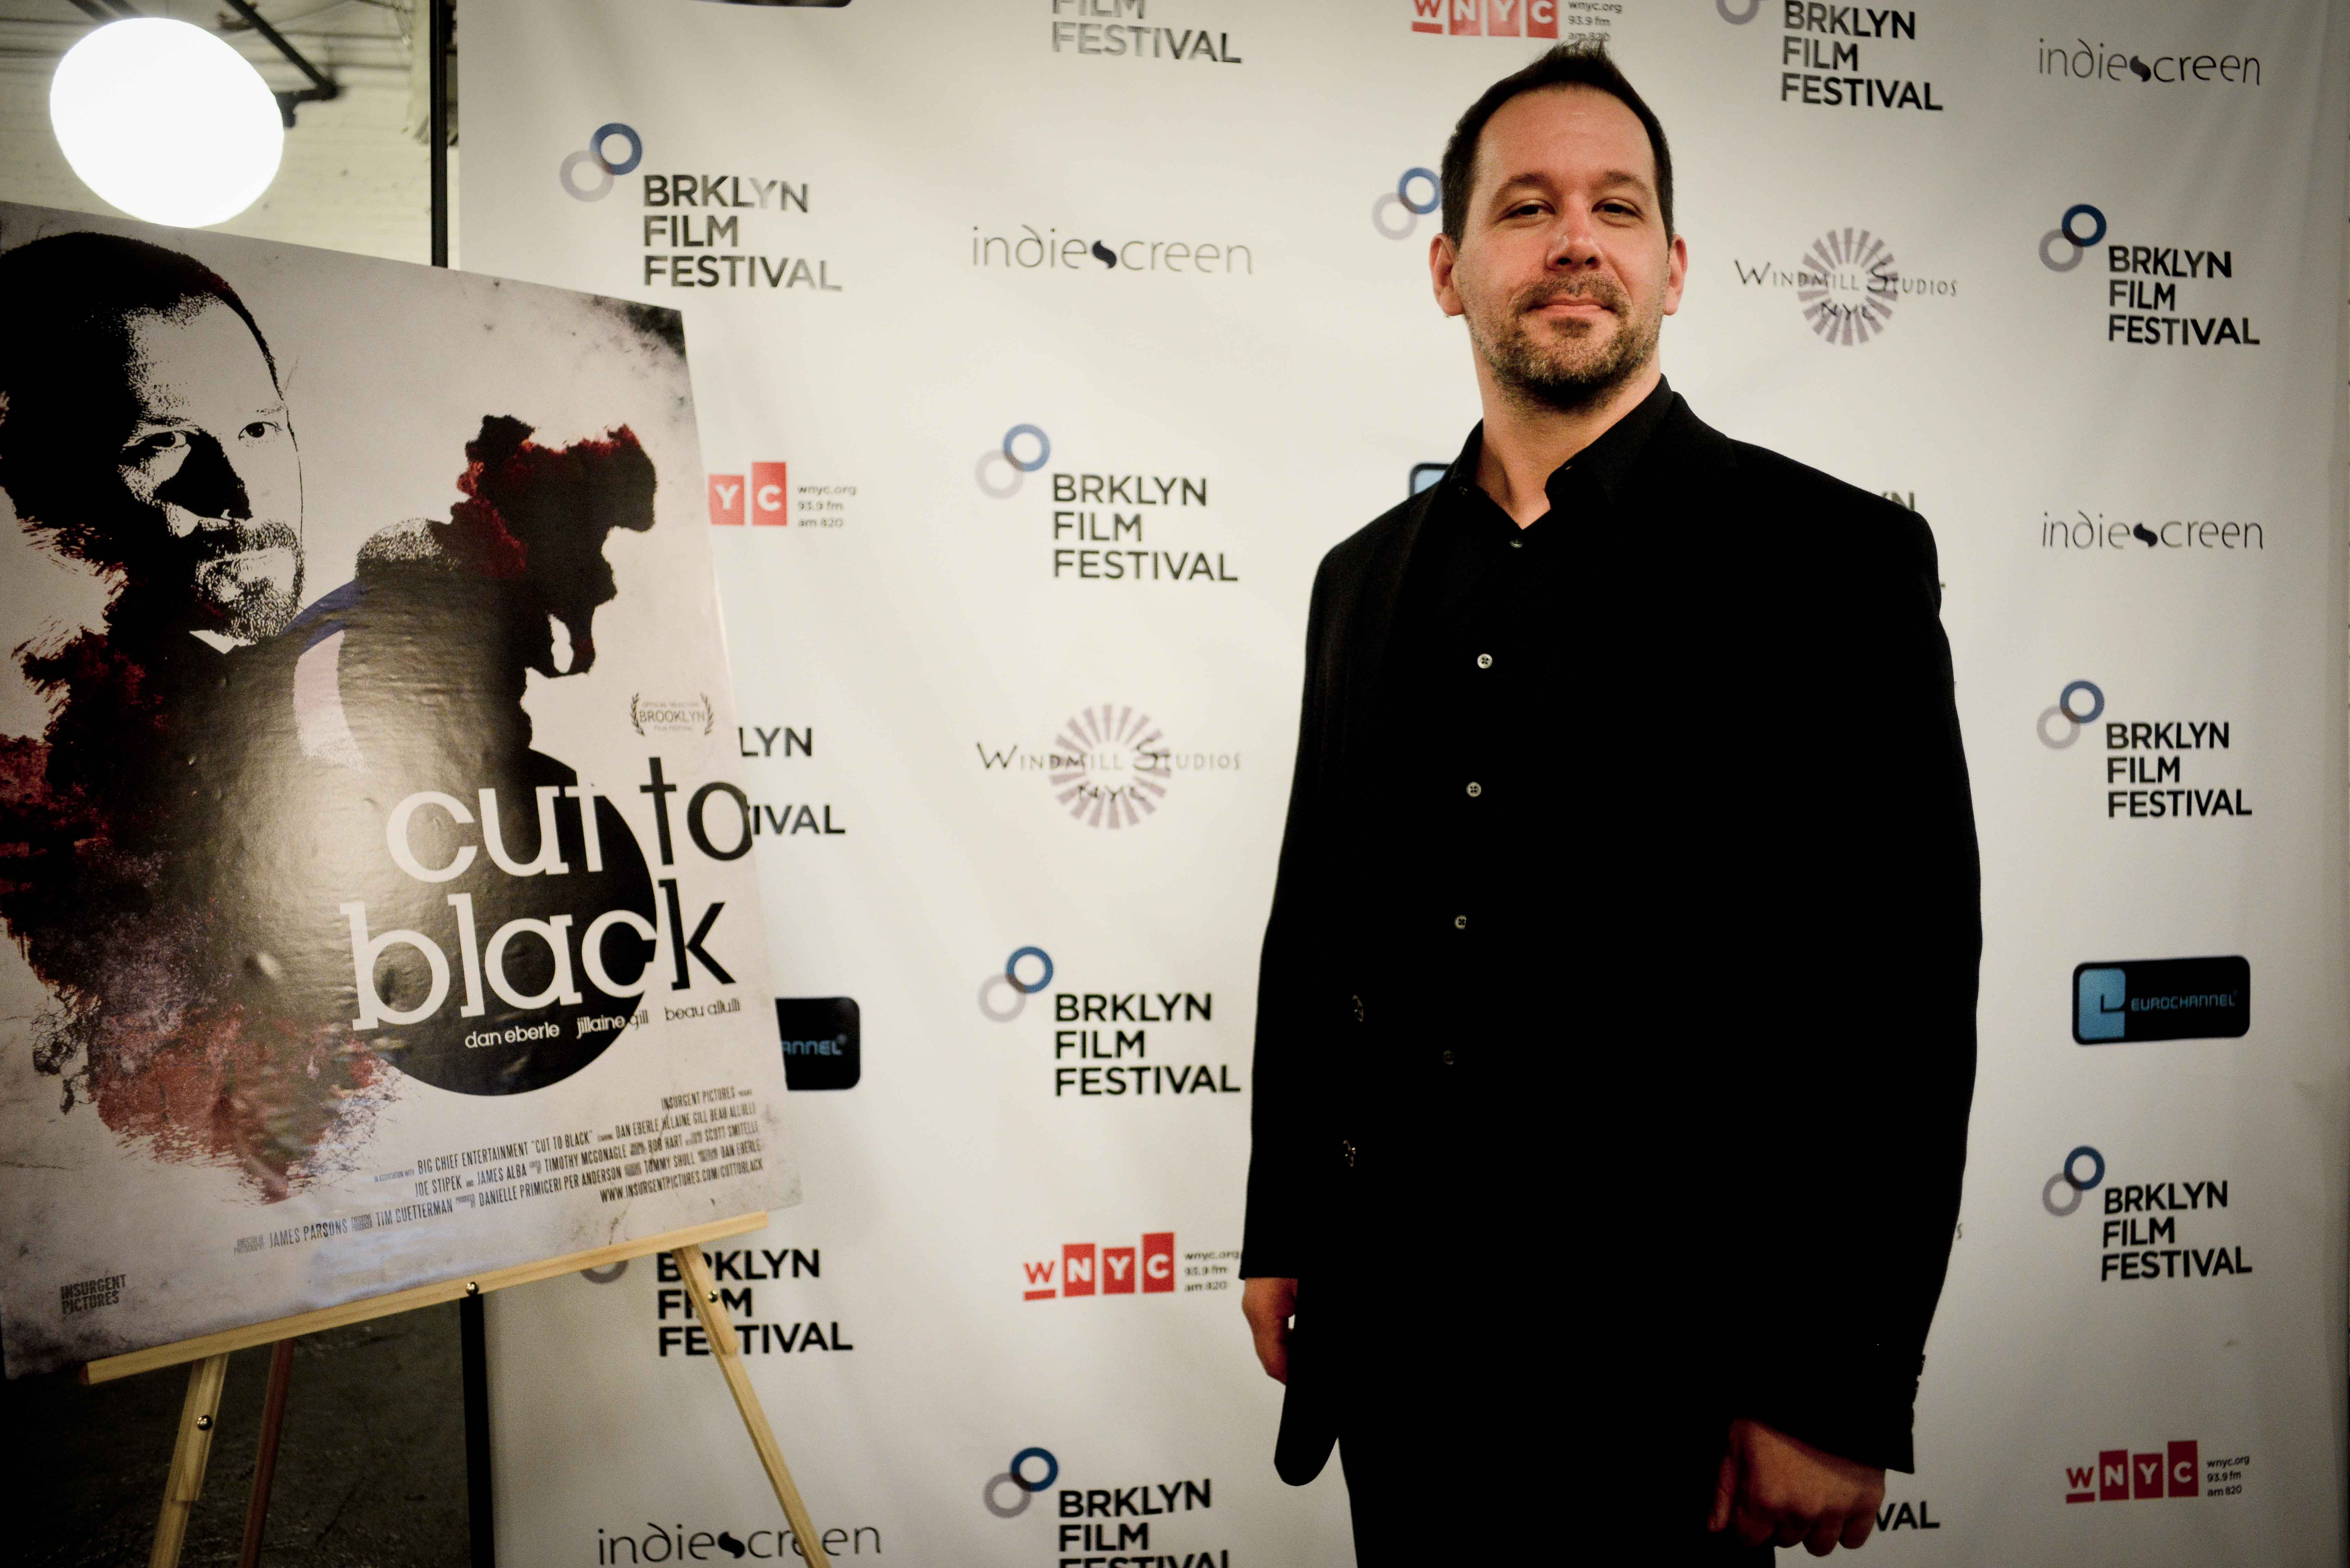 Dan Eberle at the 'Cut to Black' premiere on closing night of the 16th Annual Brooklyn Film Festival.